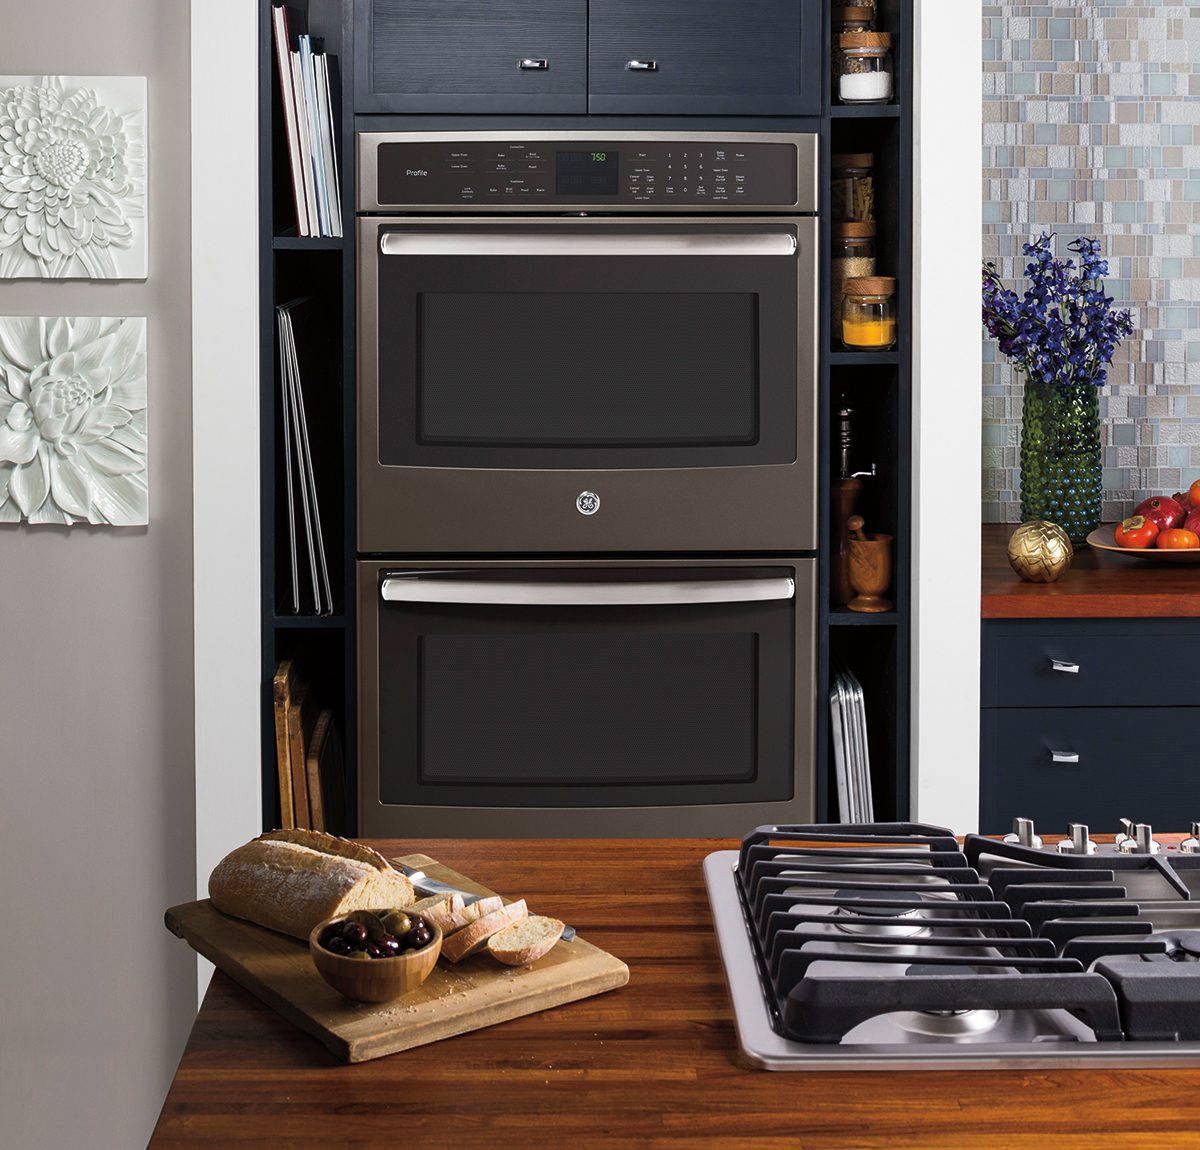 Get to Know GE Appliances at Best Buy @BestBuy @GEAppliances #geslate